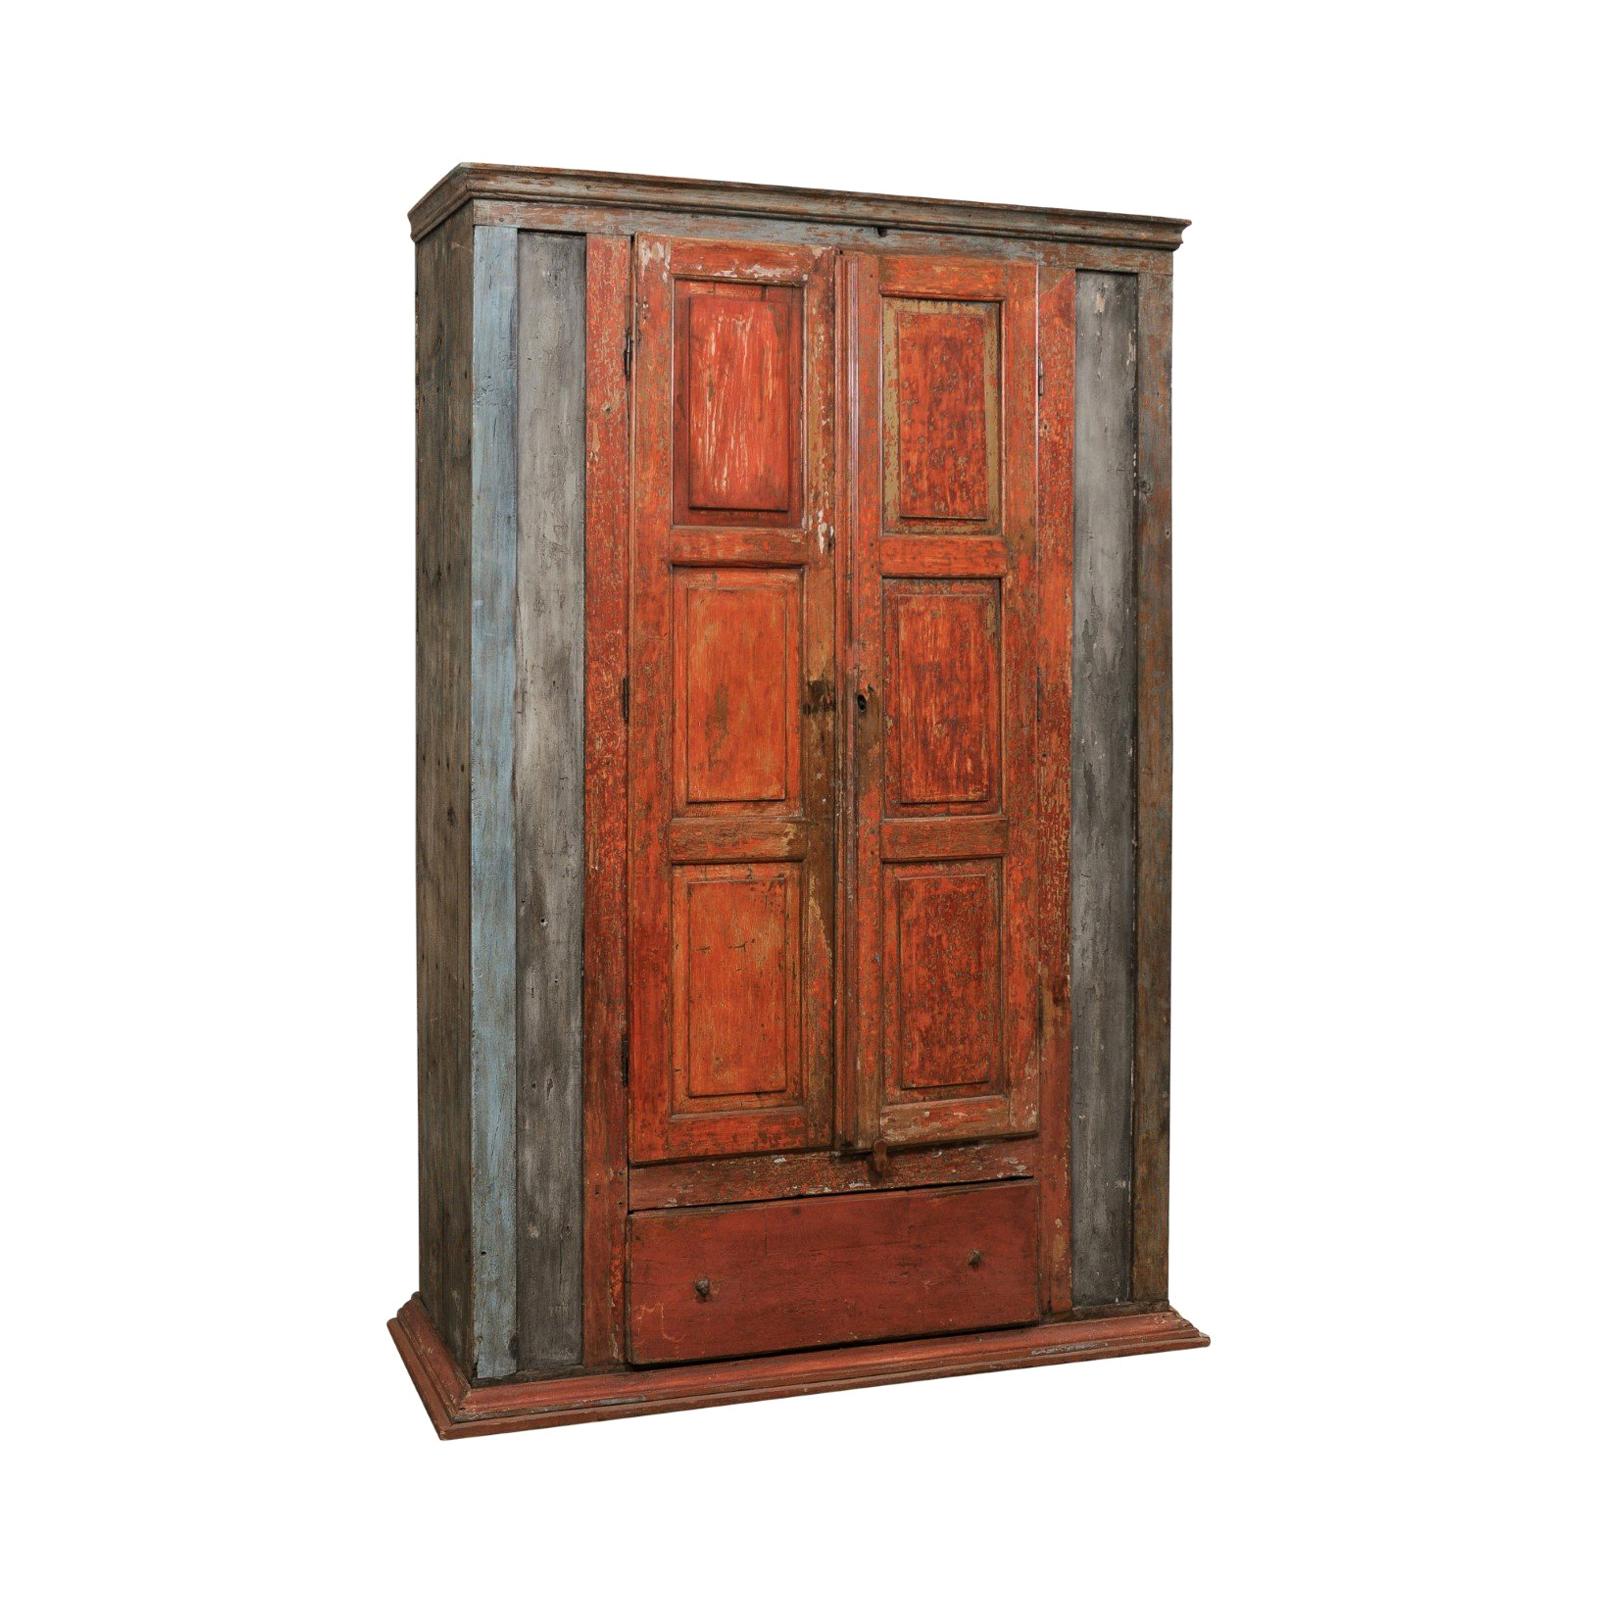 An 8+ Ft. Tall Antique Storage Cabinet from Brazil, with it's Original Paint For Sale